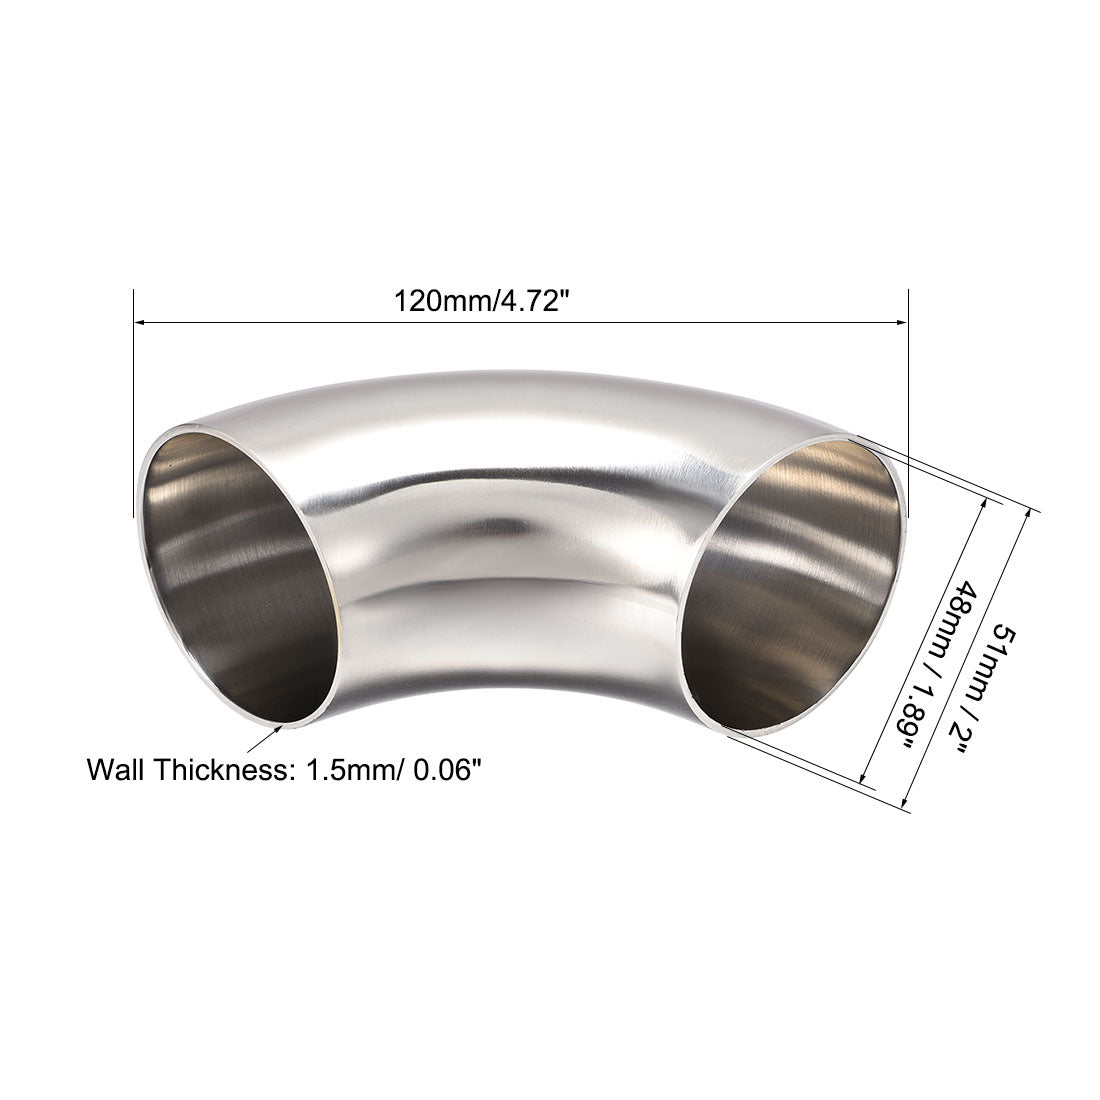 uxcell Uxcell Stainless Steel Vacuum Fitting Elbow 90 Degree Polished 2 Inch Tube OD 2pcs